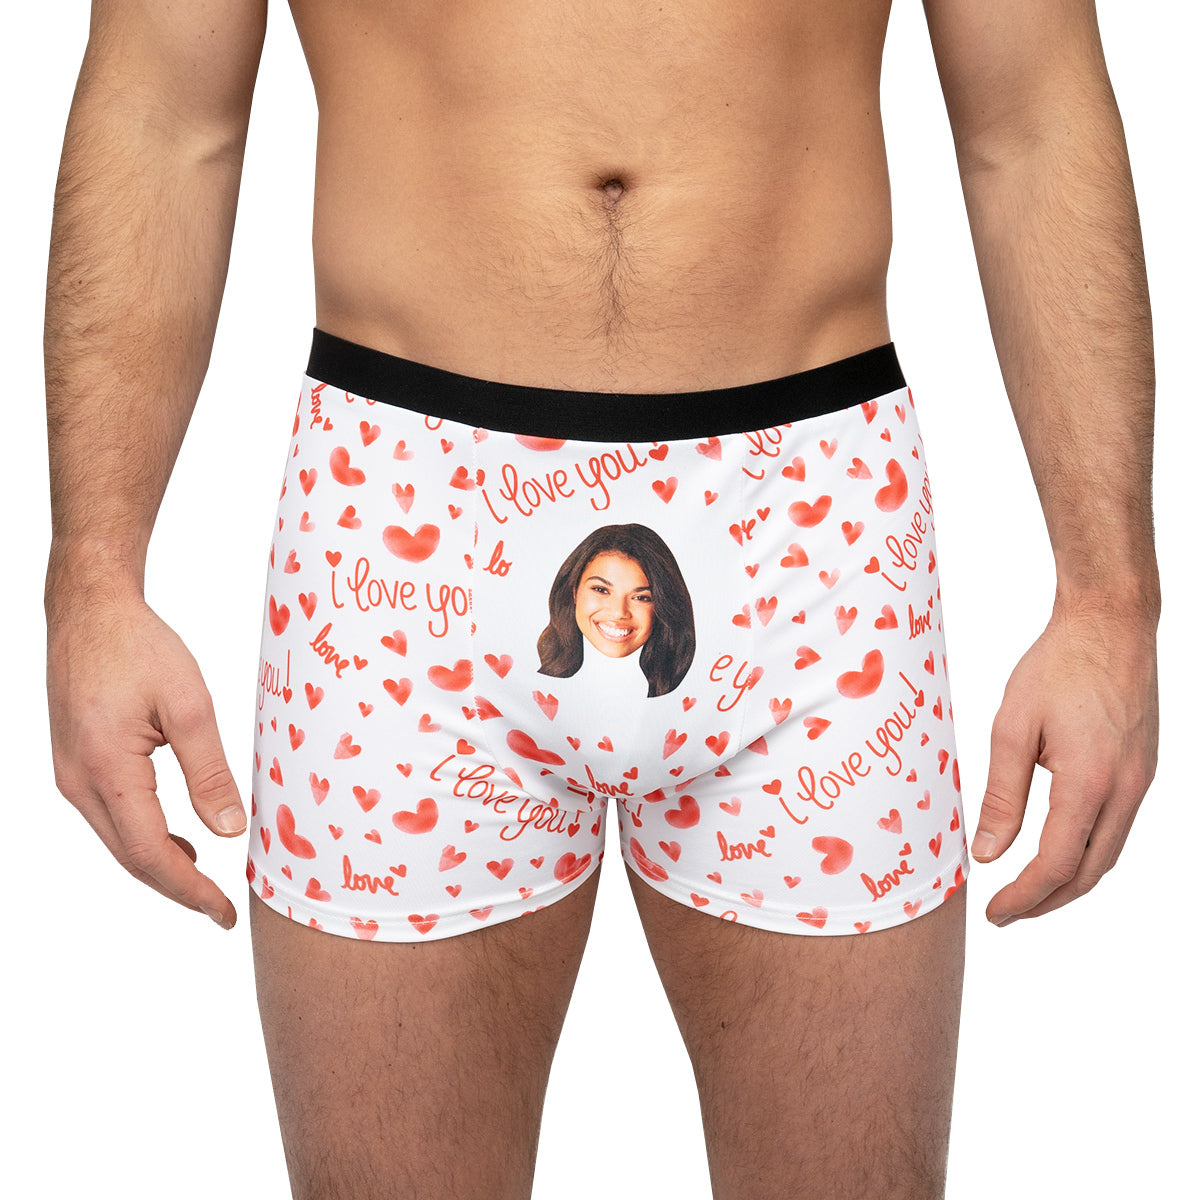 Personalised Face Knickers - Ladies Your Face Pants